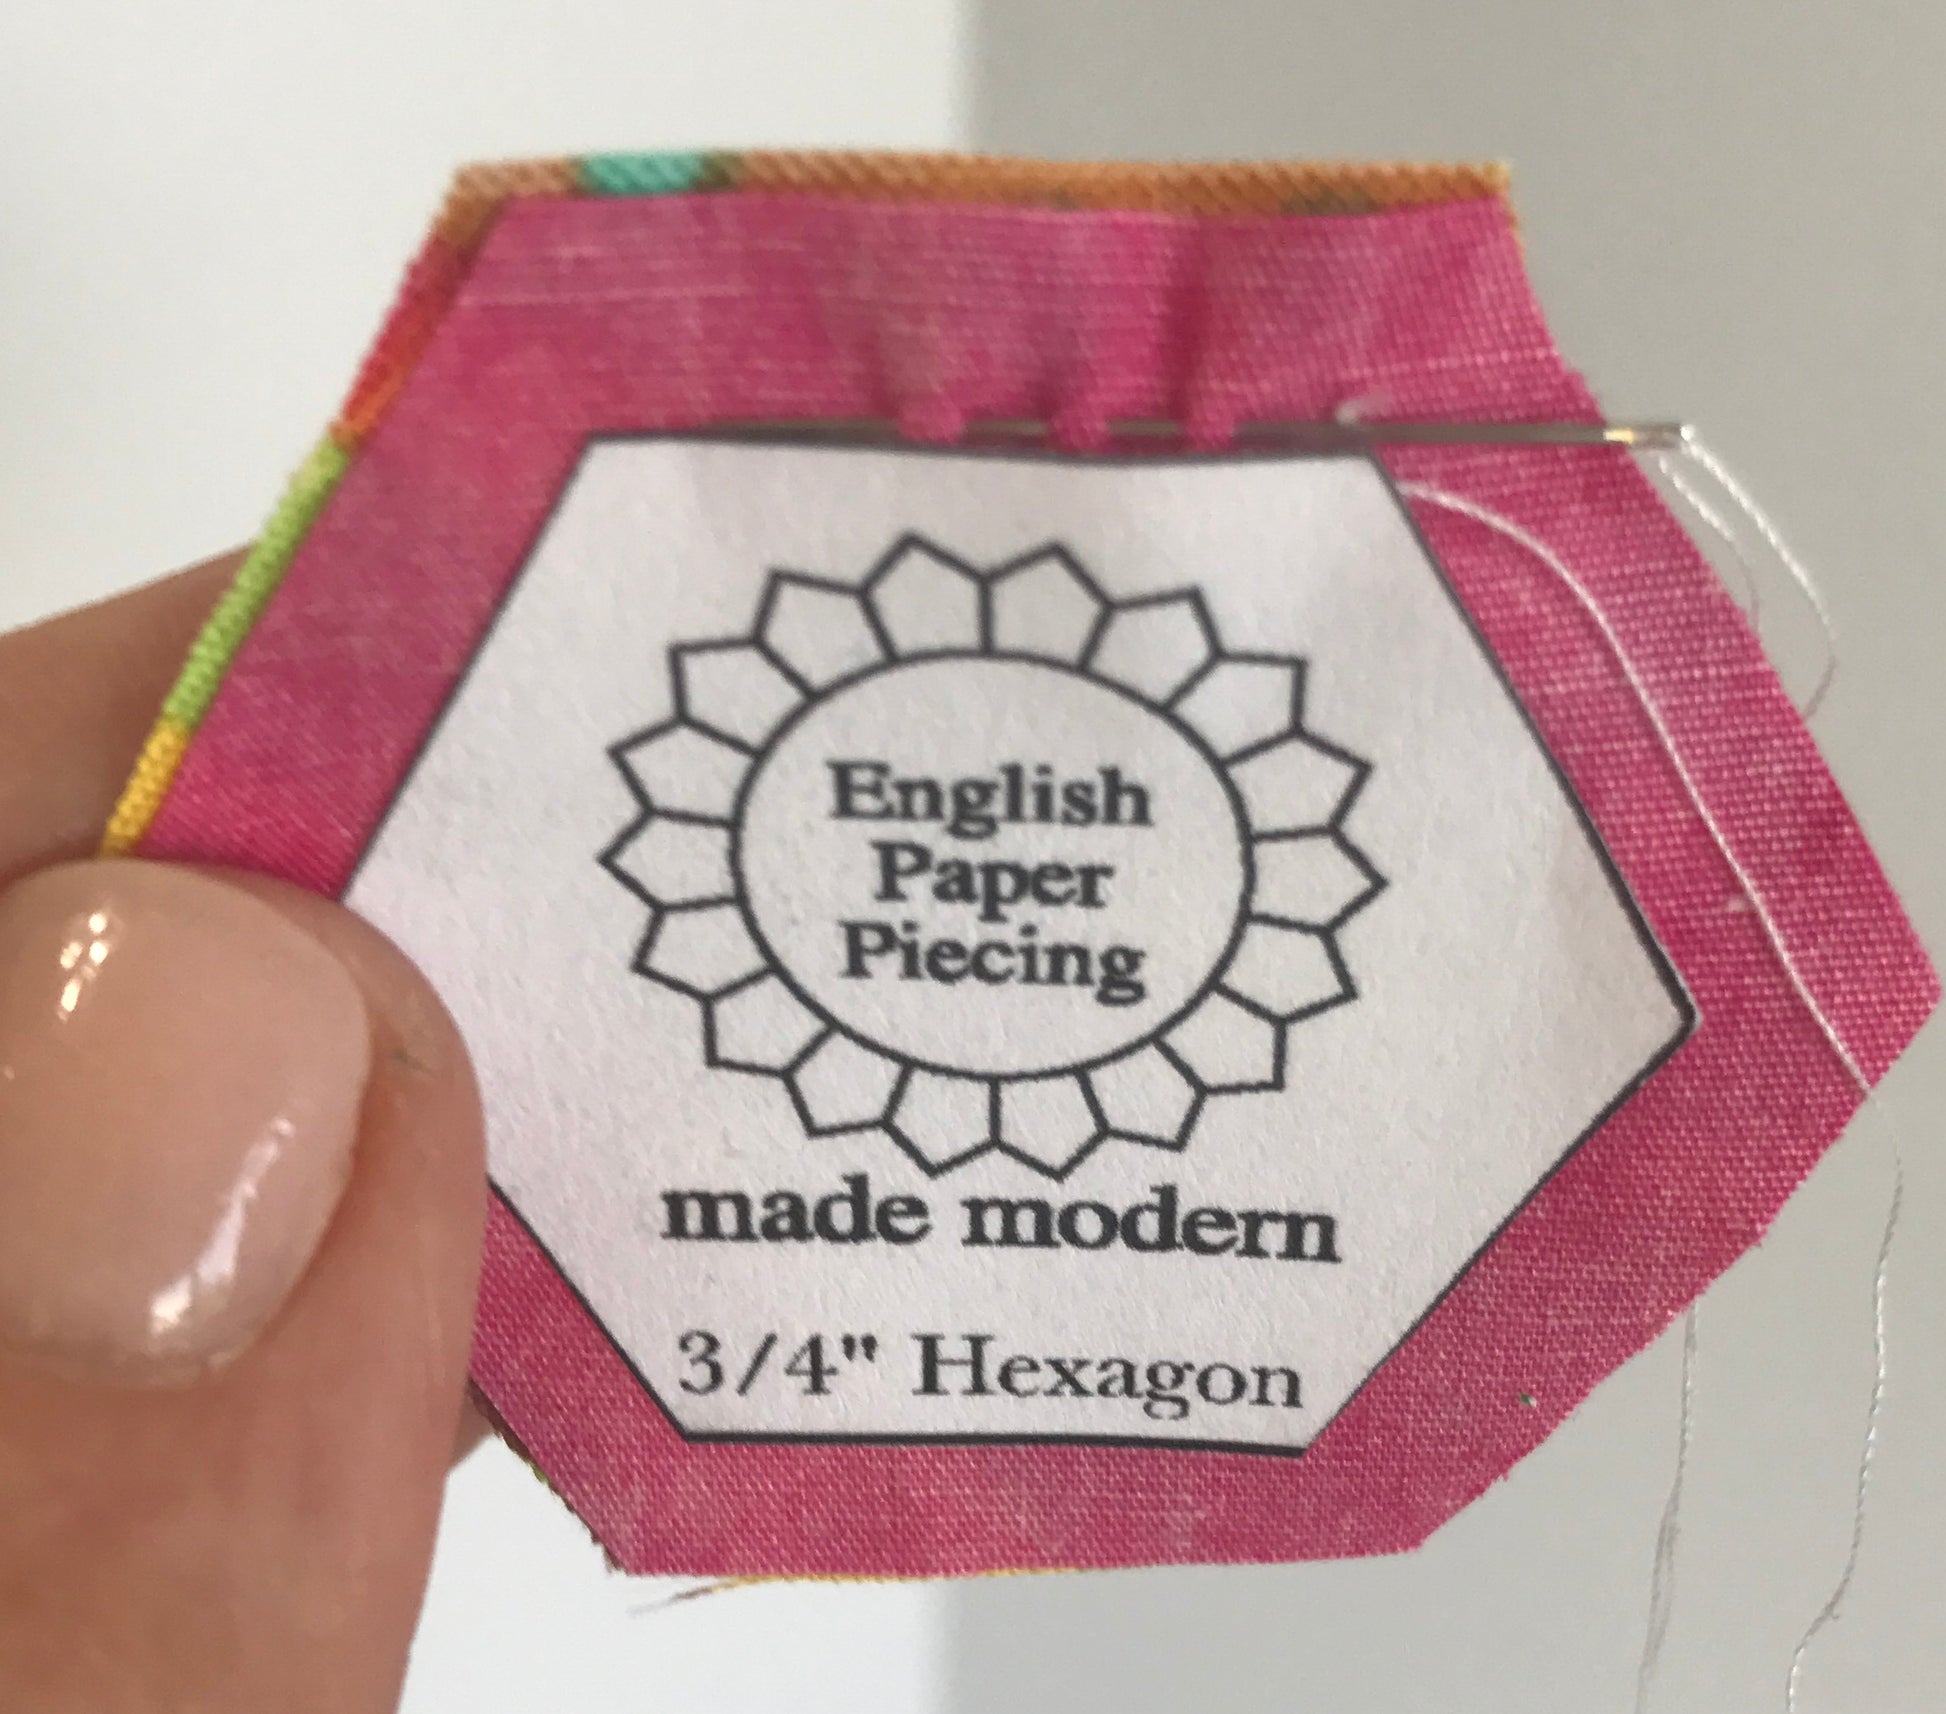 English Paper PIecing Made Easy straight stitch by hand